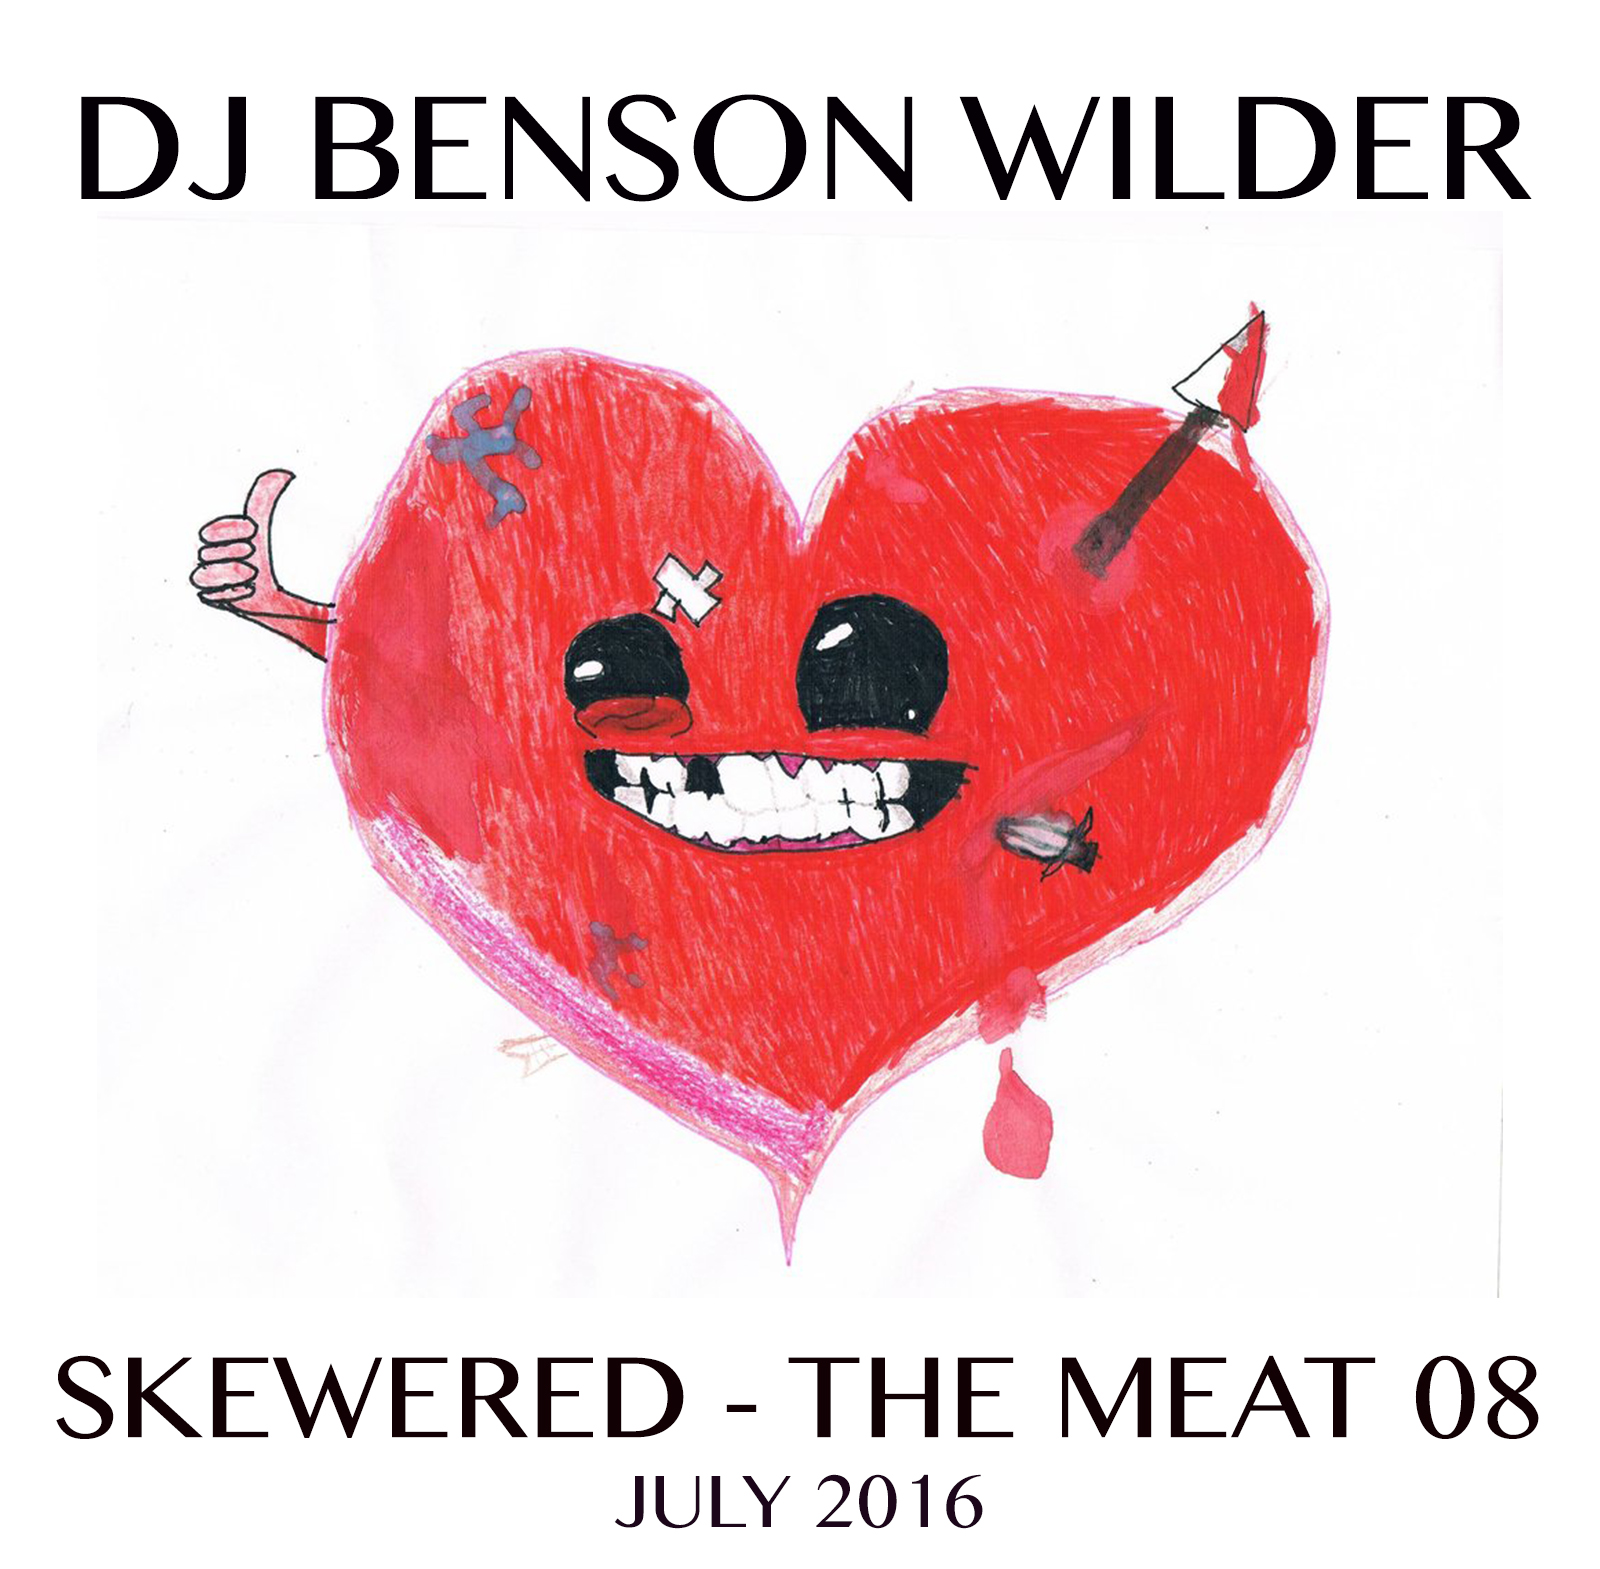 SKEWERED - THE MEAT 08 - July 2016